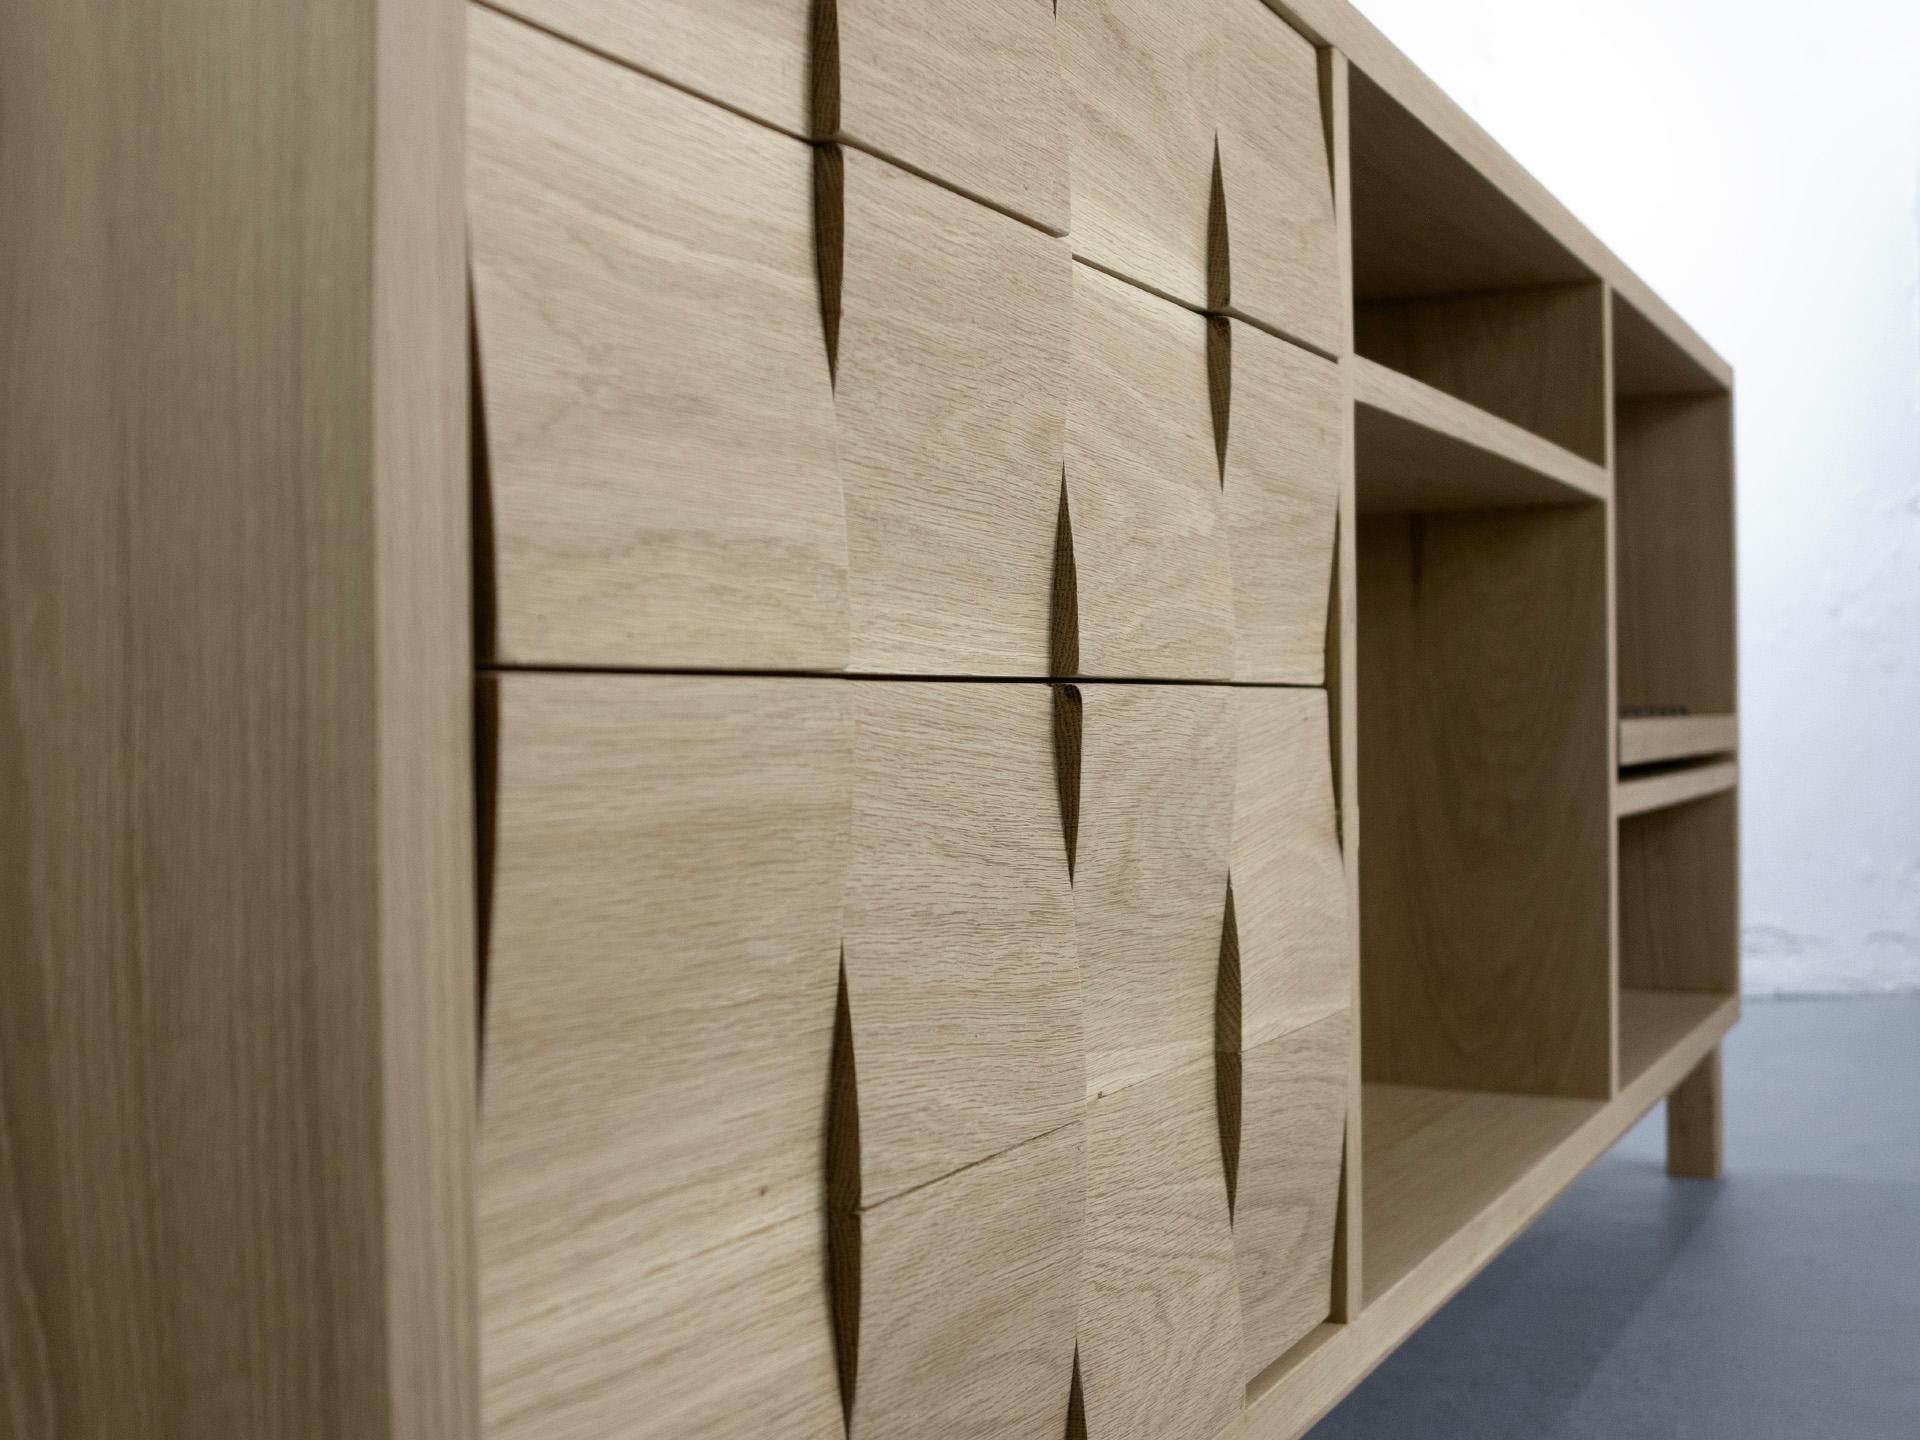 The Wave Credenza features  two drawers and a pull-down cupboard  that form a continuous wave pattern using curved oak  tiles. The drawers and media cupboard use self-opening push systems. 

At the other end a solid white oak sliding shelf opens